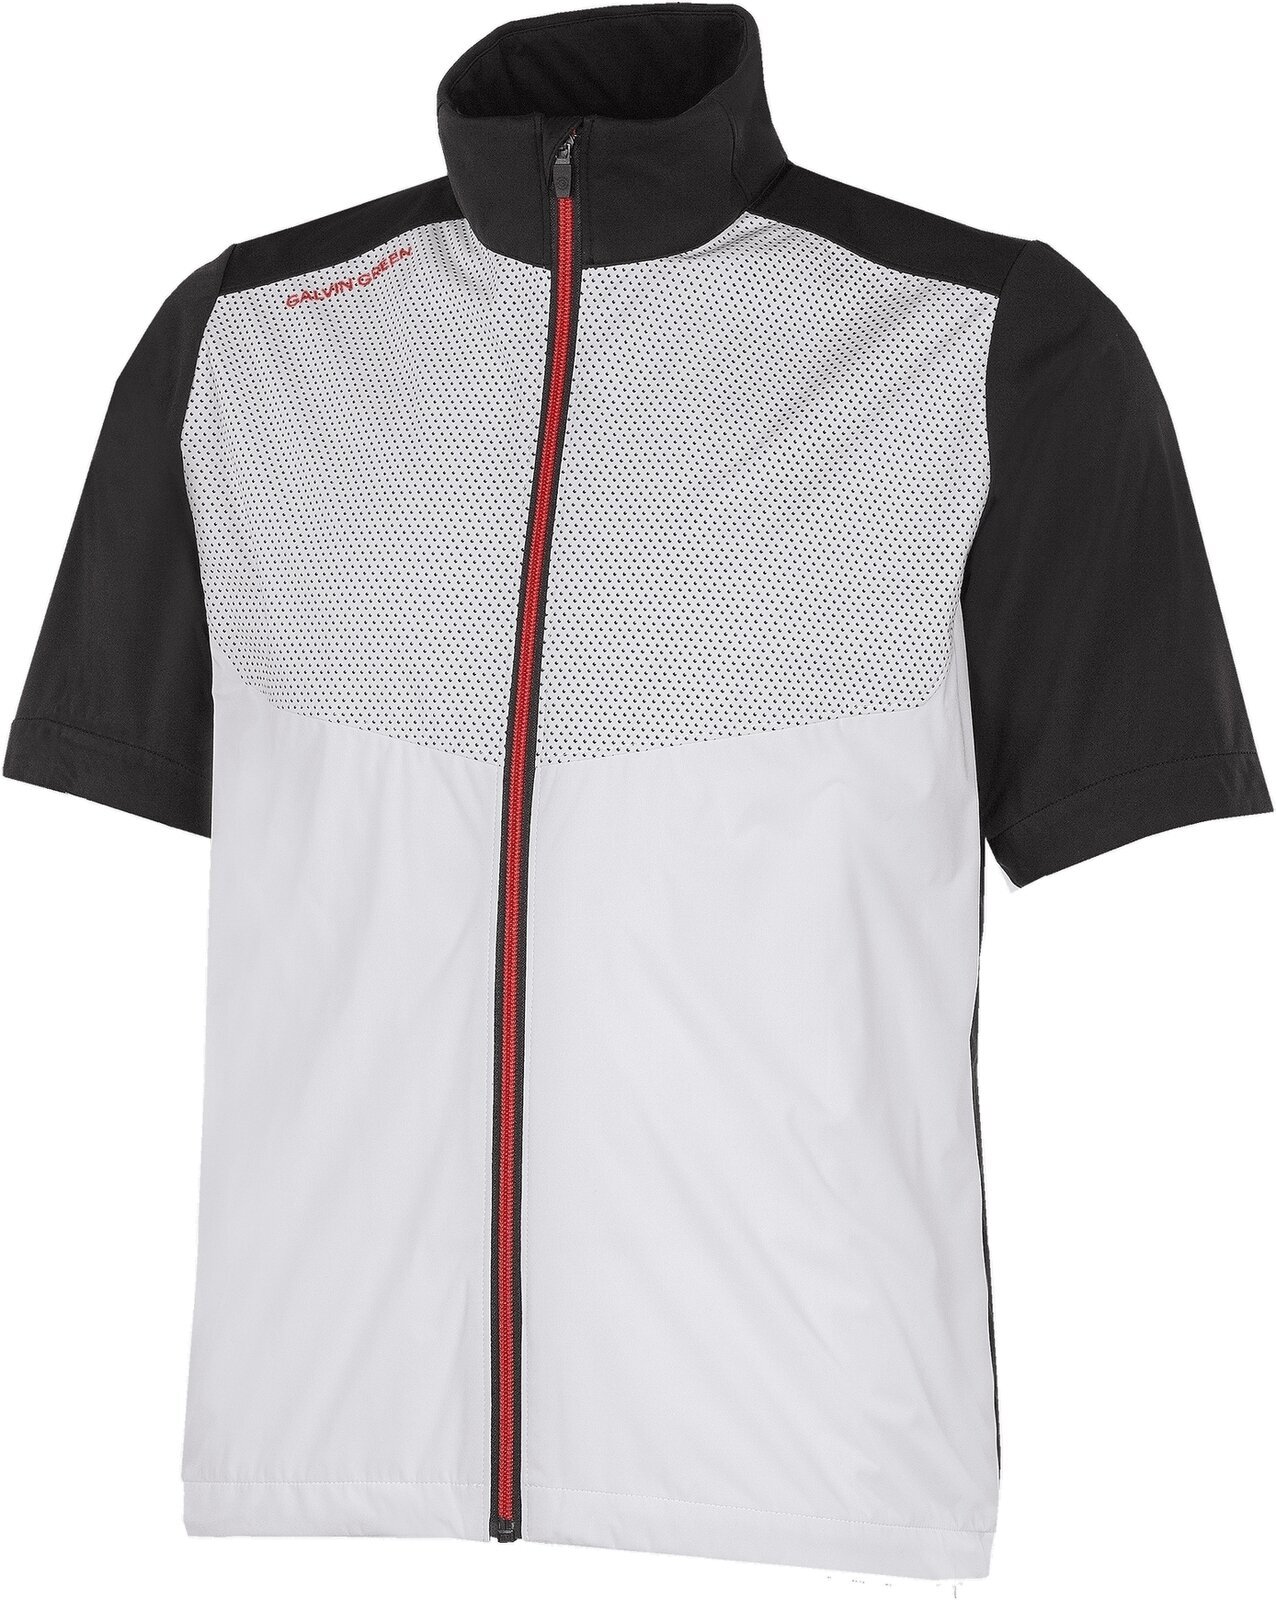 Veste Galvin Green Livingston Mens Windproof And Water Repellent Short Sleeve Jacket White/Black/Red XL